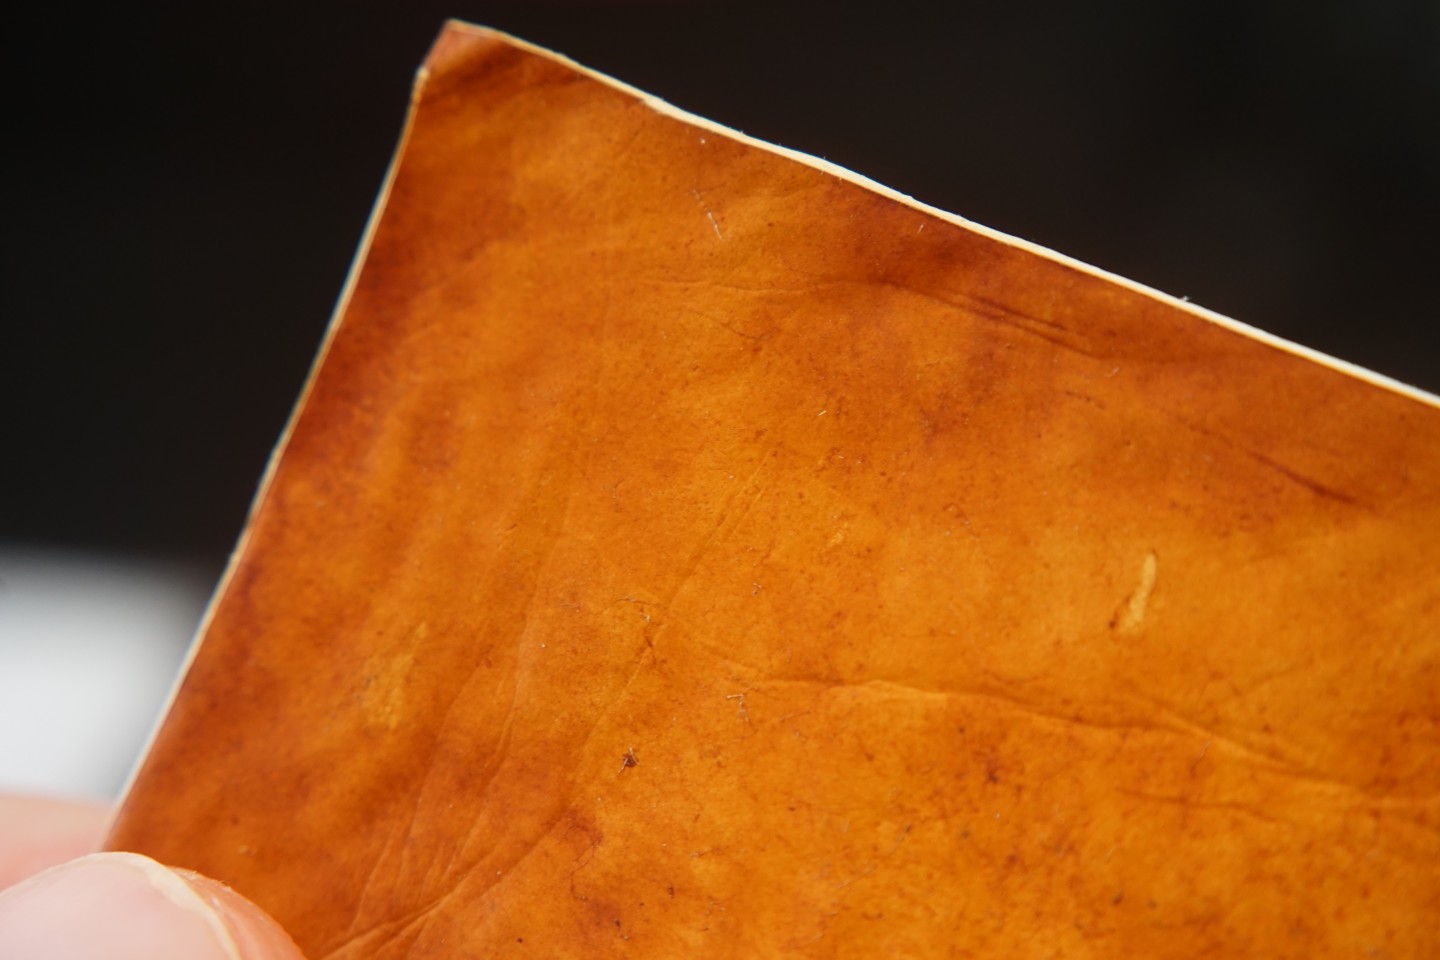 A closer look at the leather product developed from mycelium fungi sheets